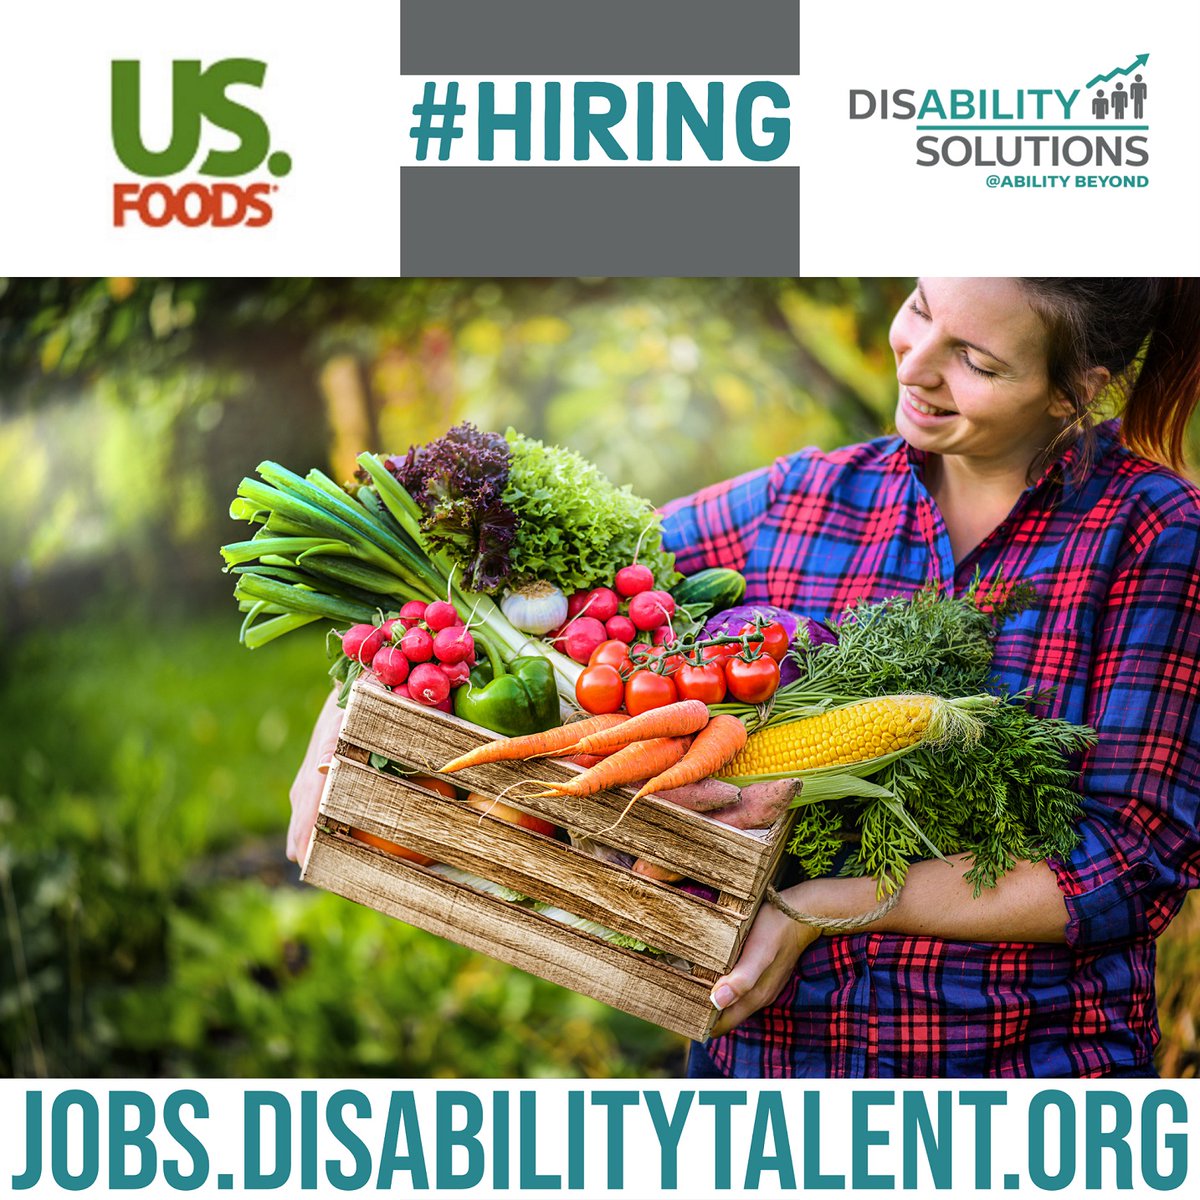 @USFoods is hiring! 
Apply now on the @DSTalentatWork Career Center here 
hubs.ly/Q01Twcwl0

Sign up for a free account and have alerts sent to you notifying of new jobs in your area here:hubs.ly/Q01Twbr20

#Hiring #Disability #DisabilityEmployment